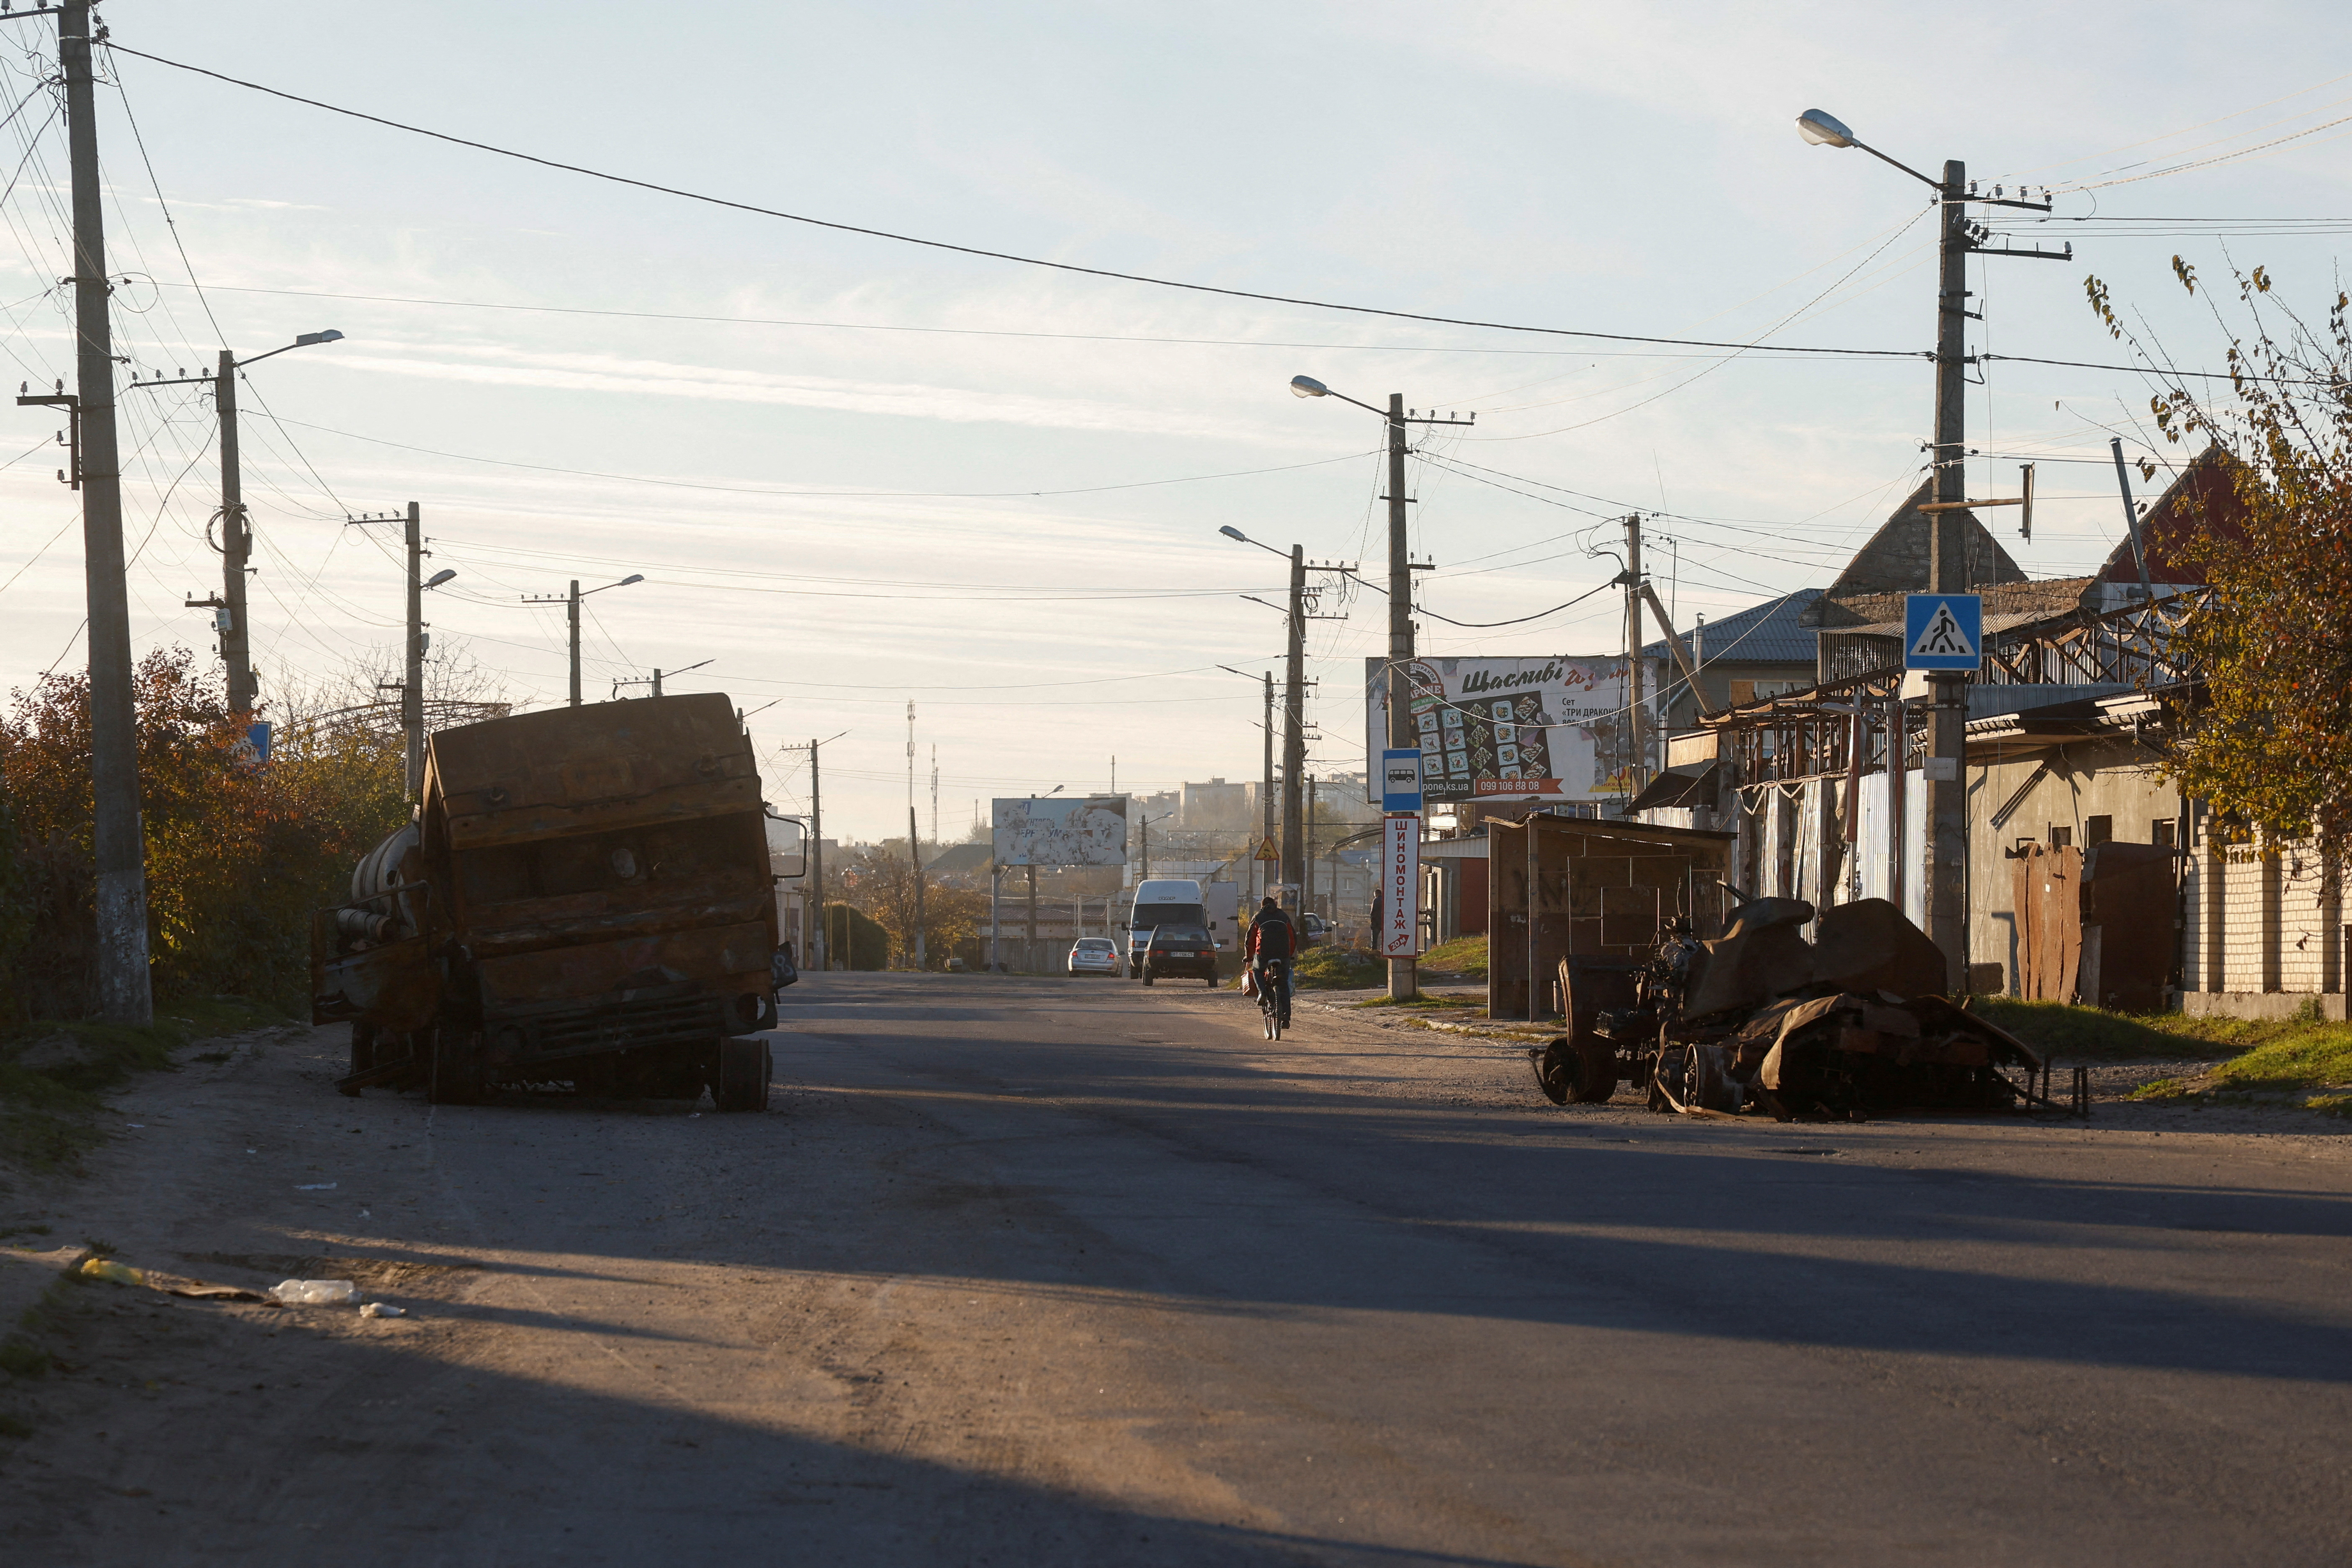 View shows destroyed military vehicles after Russia's retreat from Kherson, in Kherson